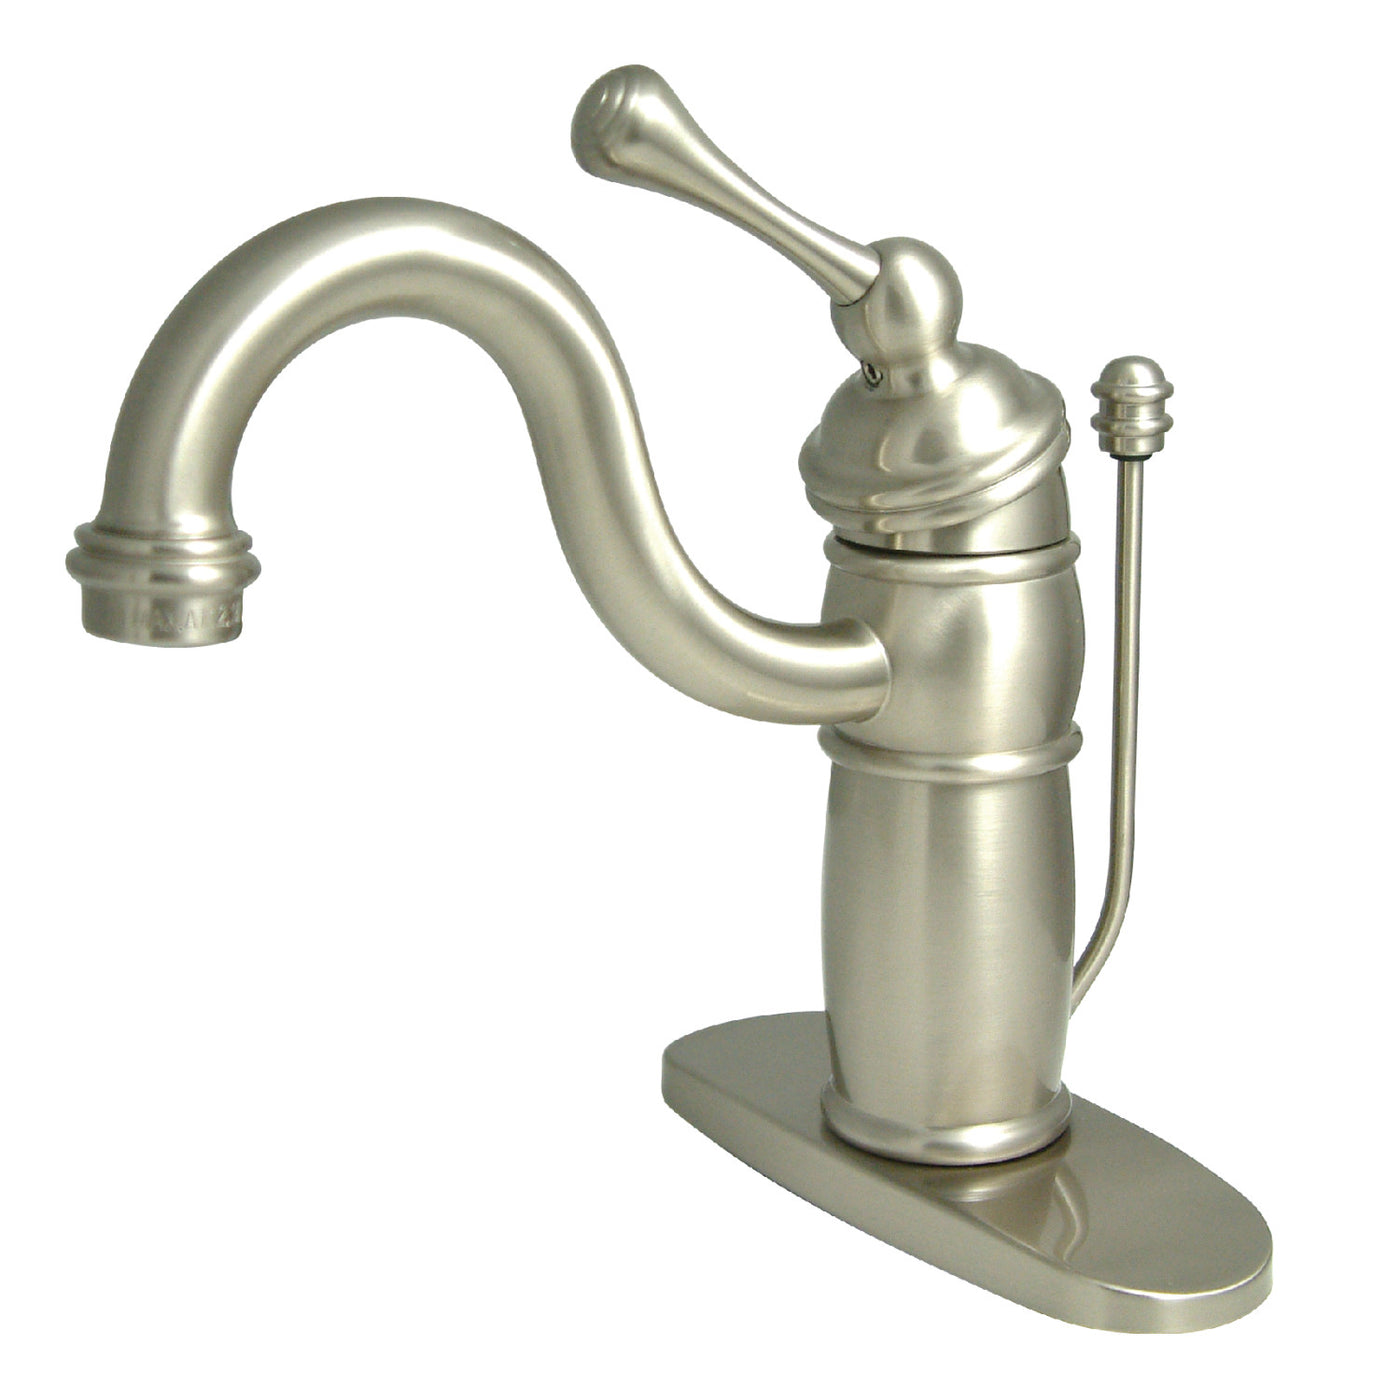 Elements of Design EB1408BL Single-Handle Bathroom Faucet with Pop-Up Drain, Brushed Nickel